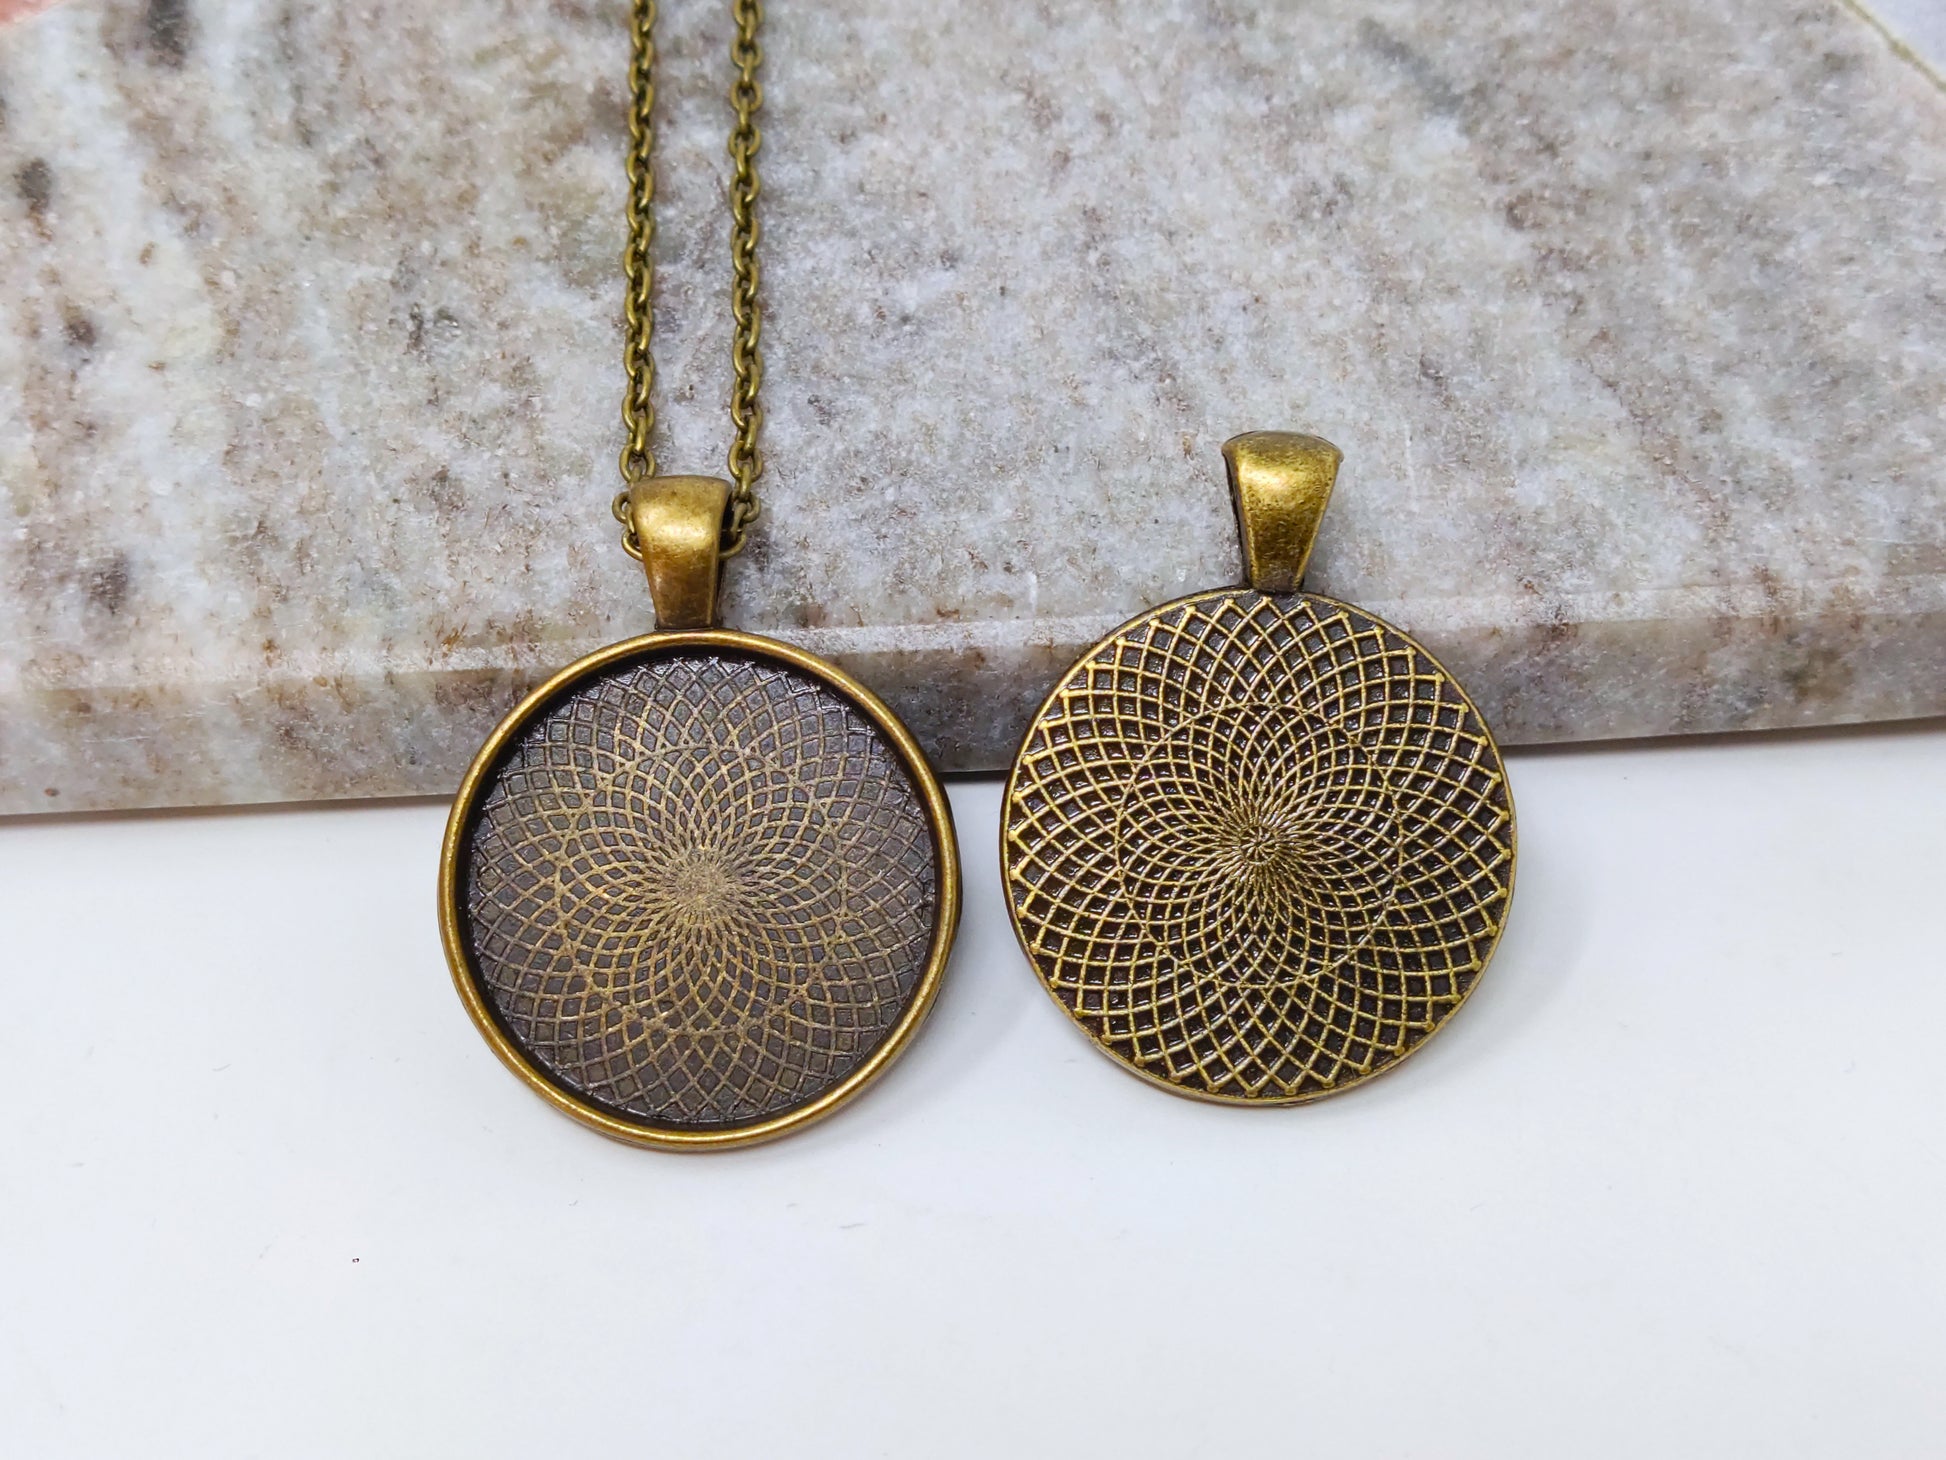 Create Handmade Jewelry with Our Antique Bronze bezel pendant. Perfect for cabochons, image cabochon, resin, gemstone cabochon. Blank pendant trays with glass are great for custom jewelry, picture pendant necklace